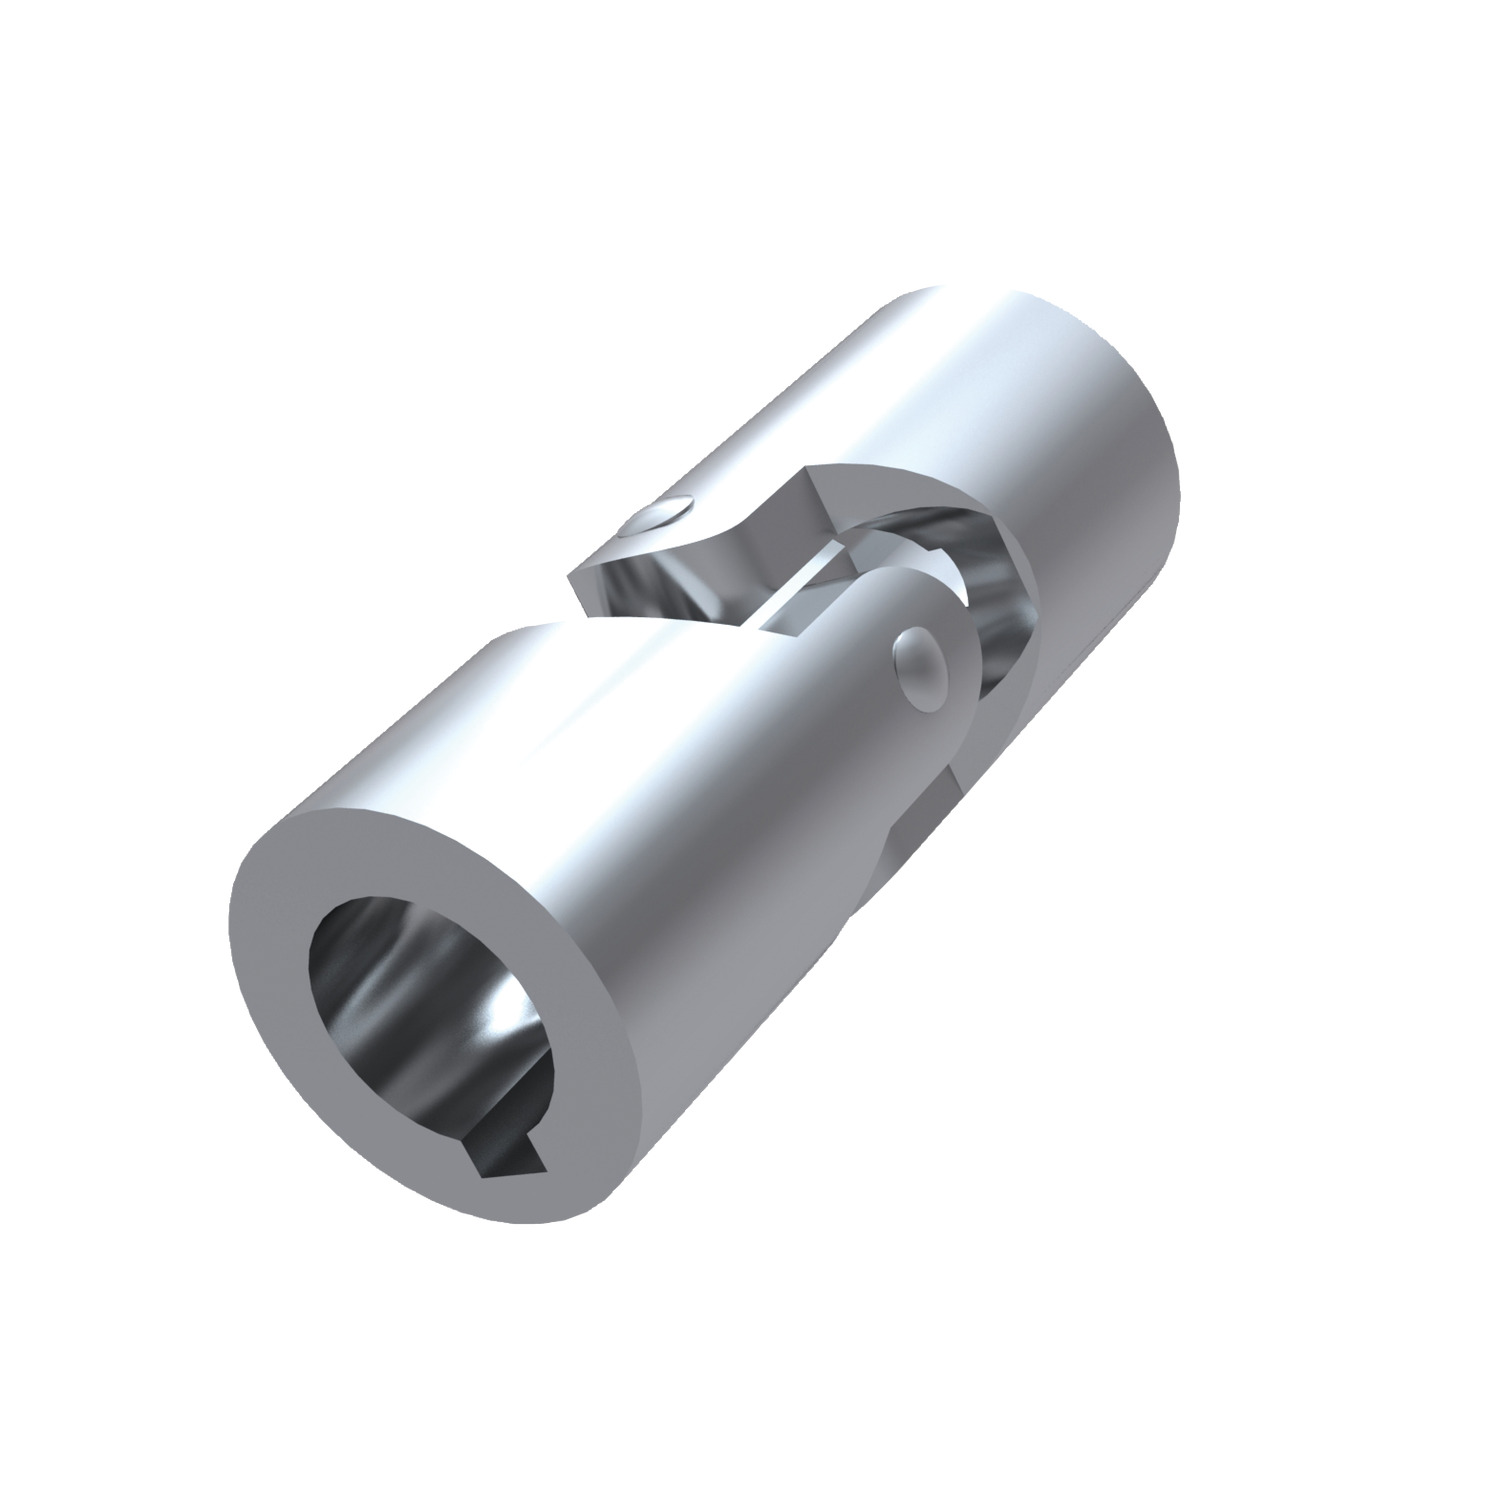 65172.W0008 Sgl Universal Joint - Free cutting St. Round Bore - 8 - 16 - 40